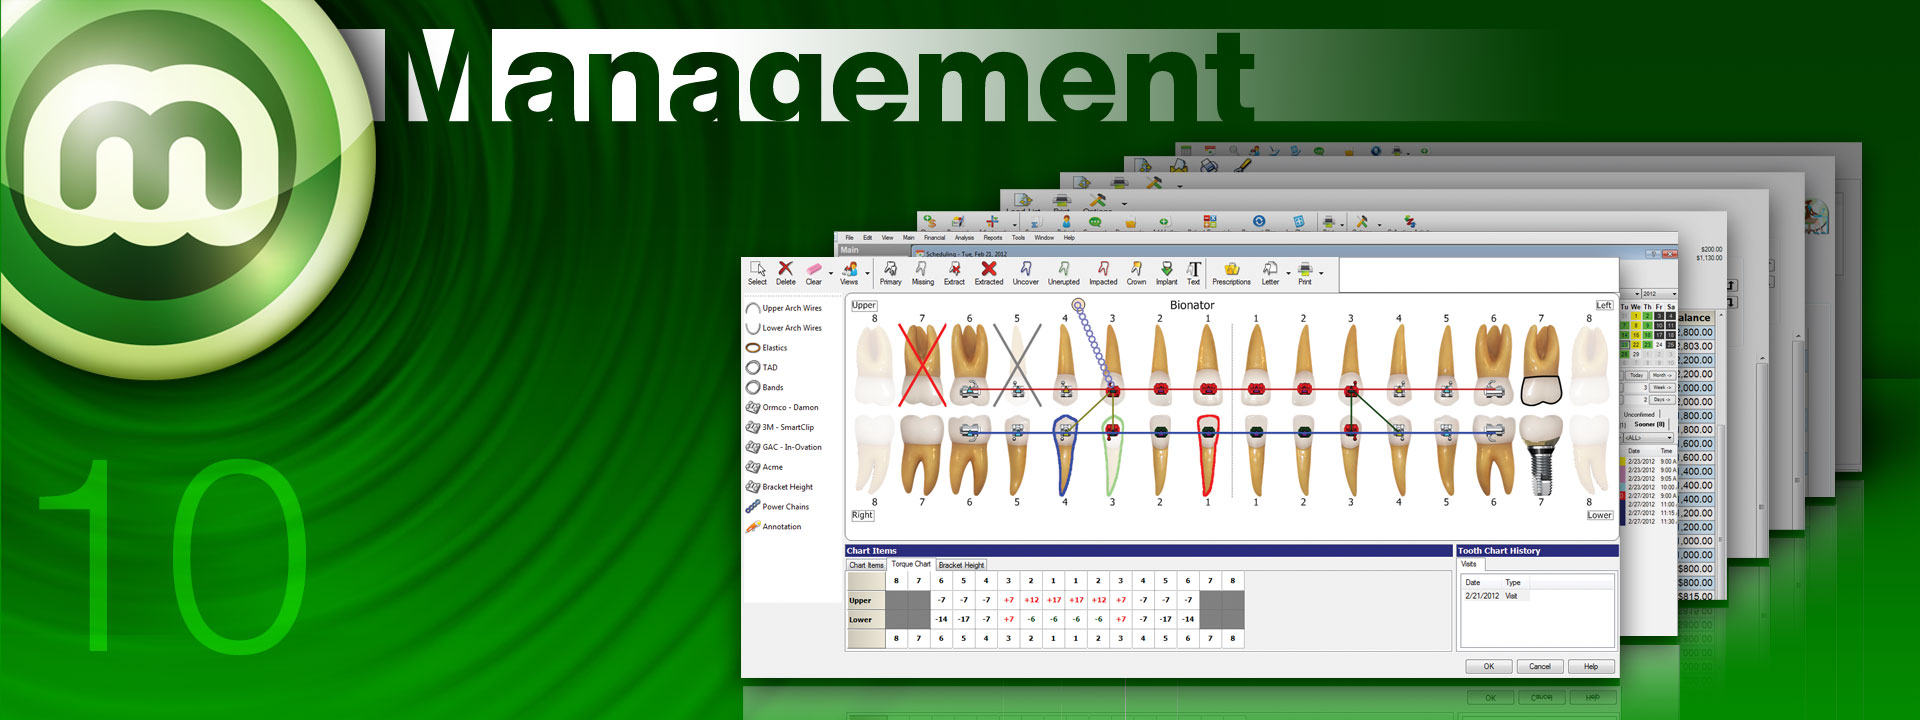 Dolphin Management is a full-featured orthodontic practice management system that enables you to efficiently manage and organize your practice flow, especially if you have high-volume, multiple locations and multiple practitioners.